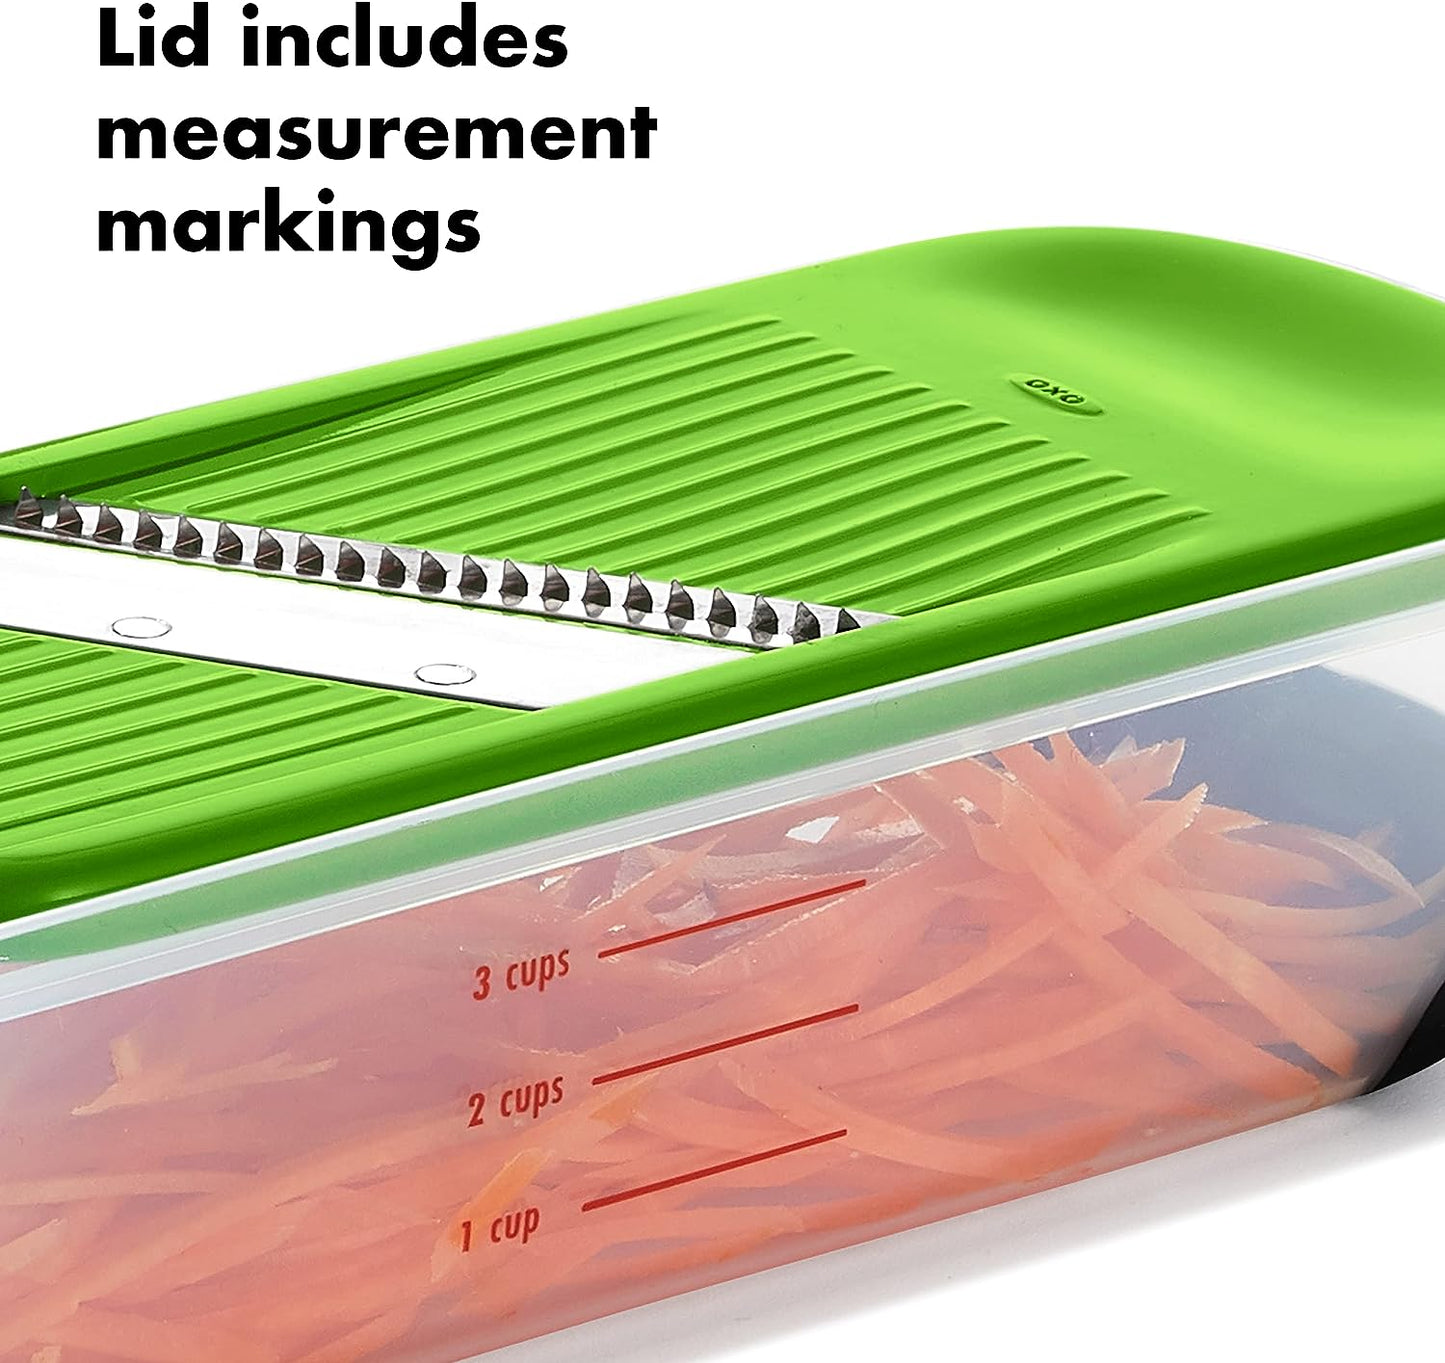 close-up of julienne slicer on the food holder that is filled with juilenned carrots and text "lid includes measurement markings" in the top corner.